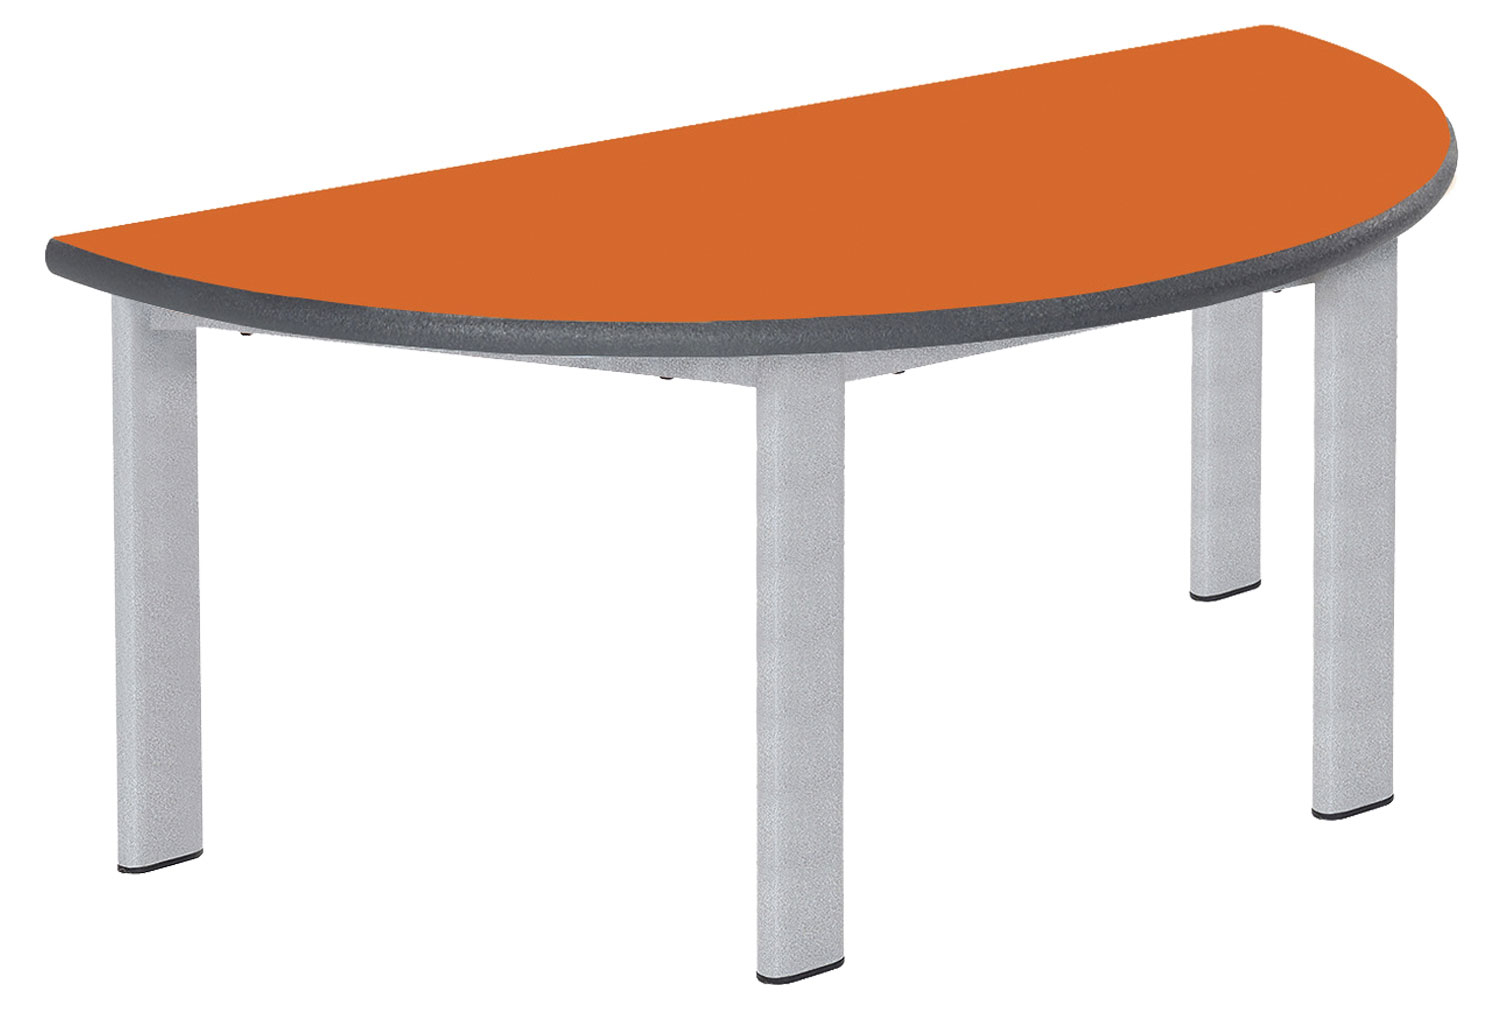 Qty 4 - Elite Static Height Semi Circular Classroom Tables 8-11 Years, Speckled Grey Frame, Lime Top, PU Charcoal Edge